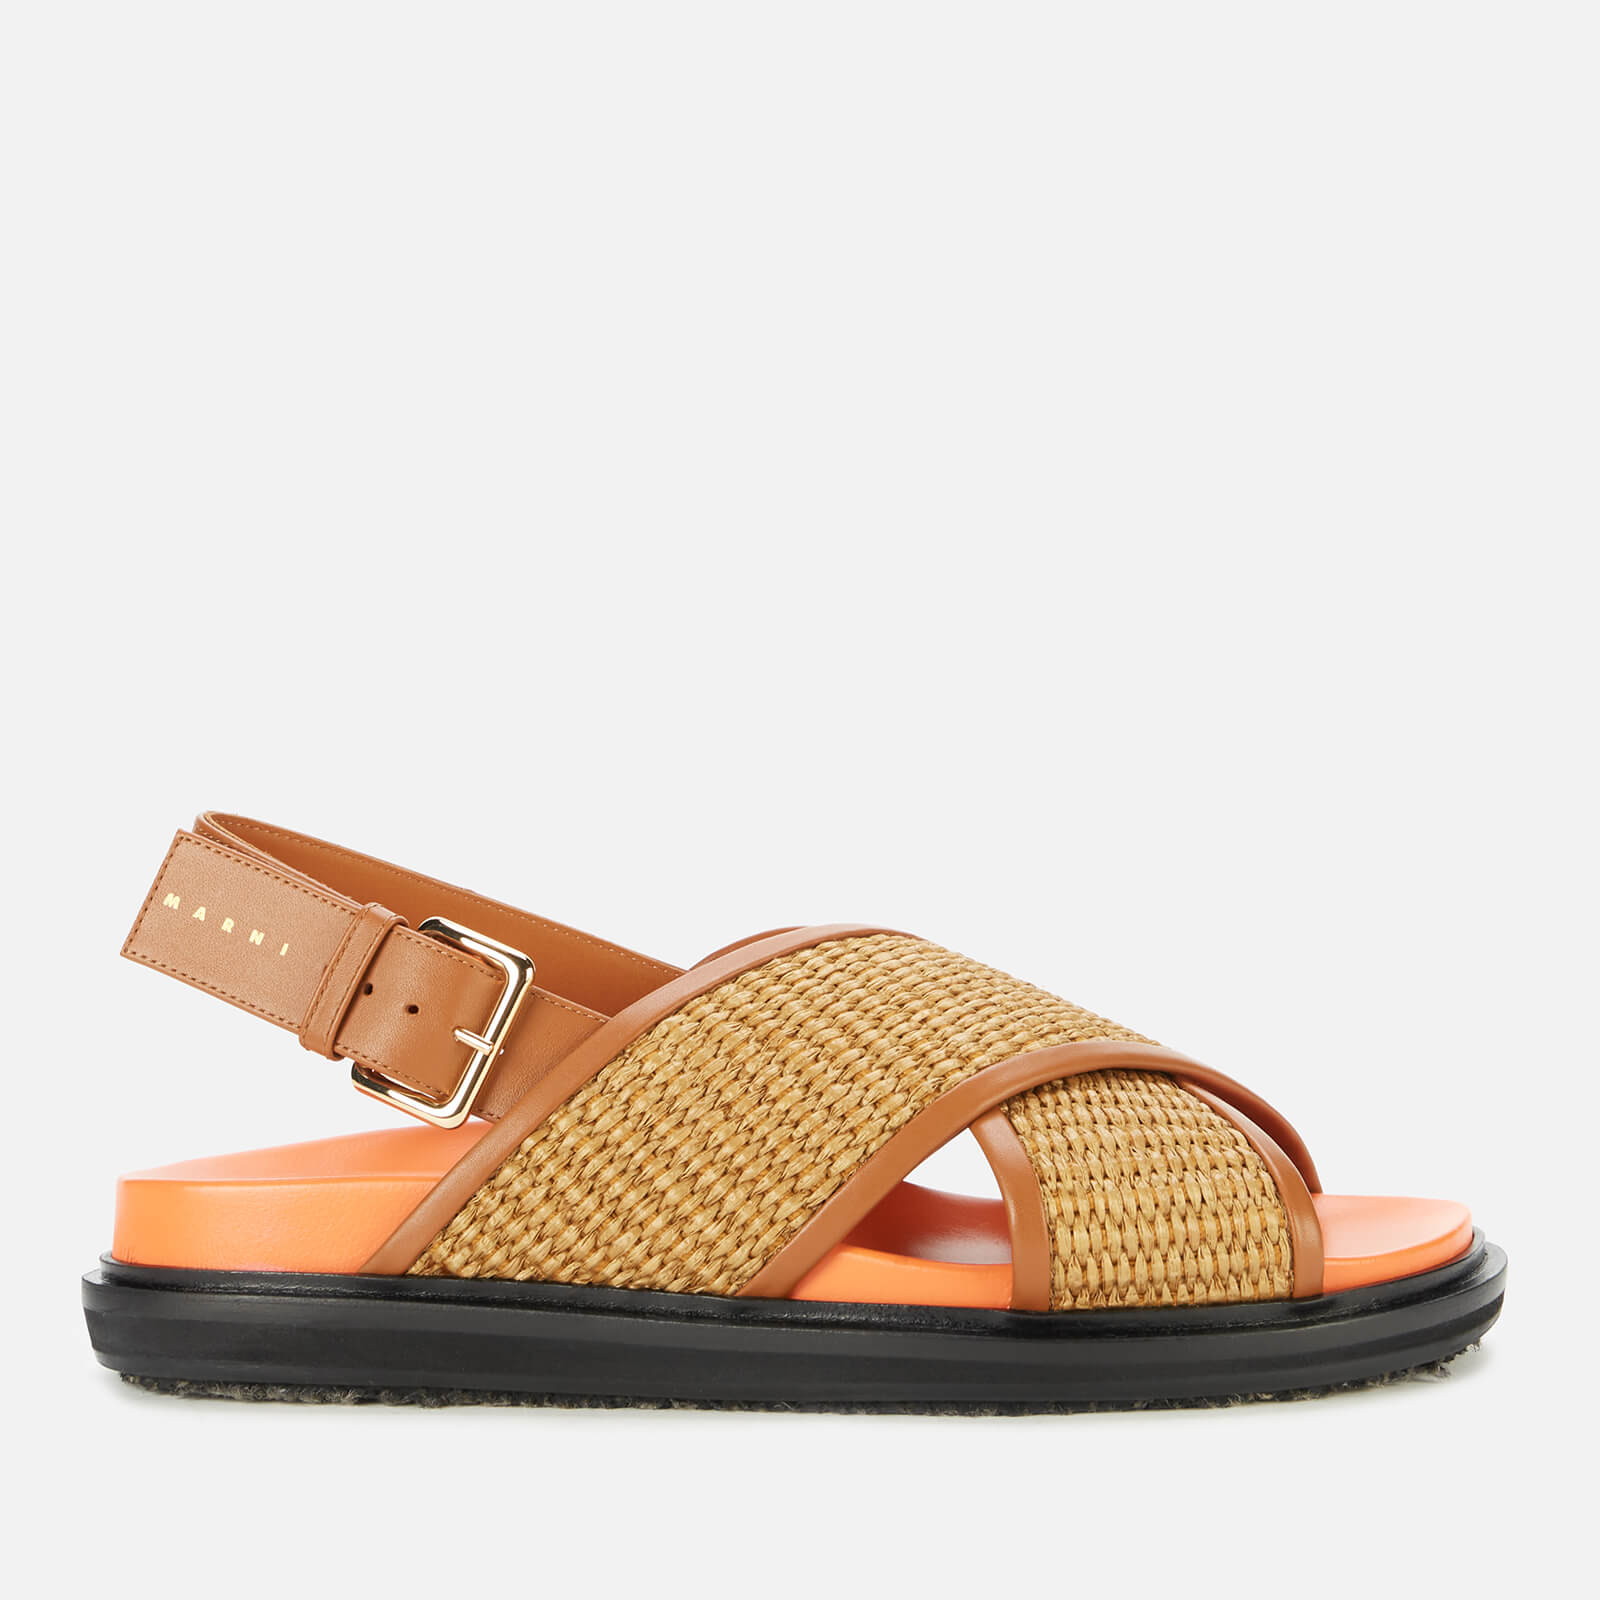 Marni Women's Woven Footbed Sandals - Raw Siena/Dust Apricot - UK 4